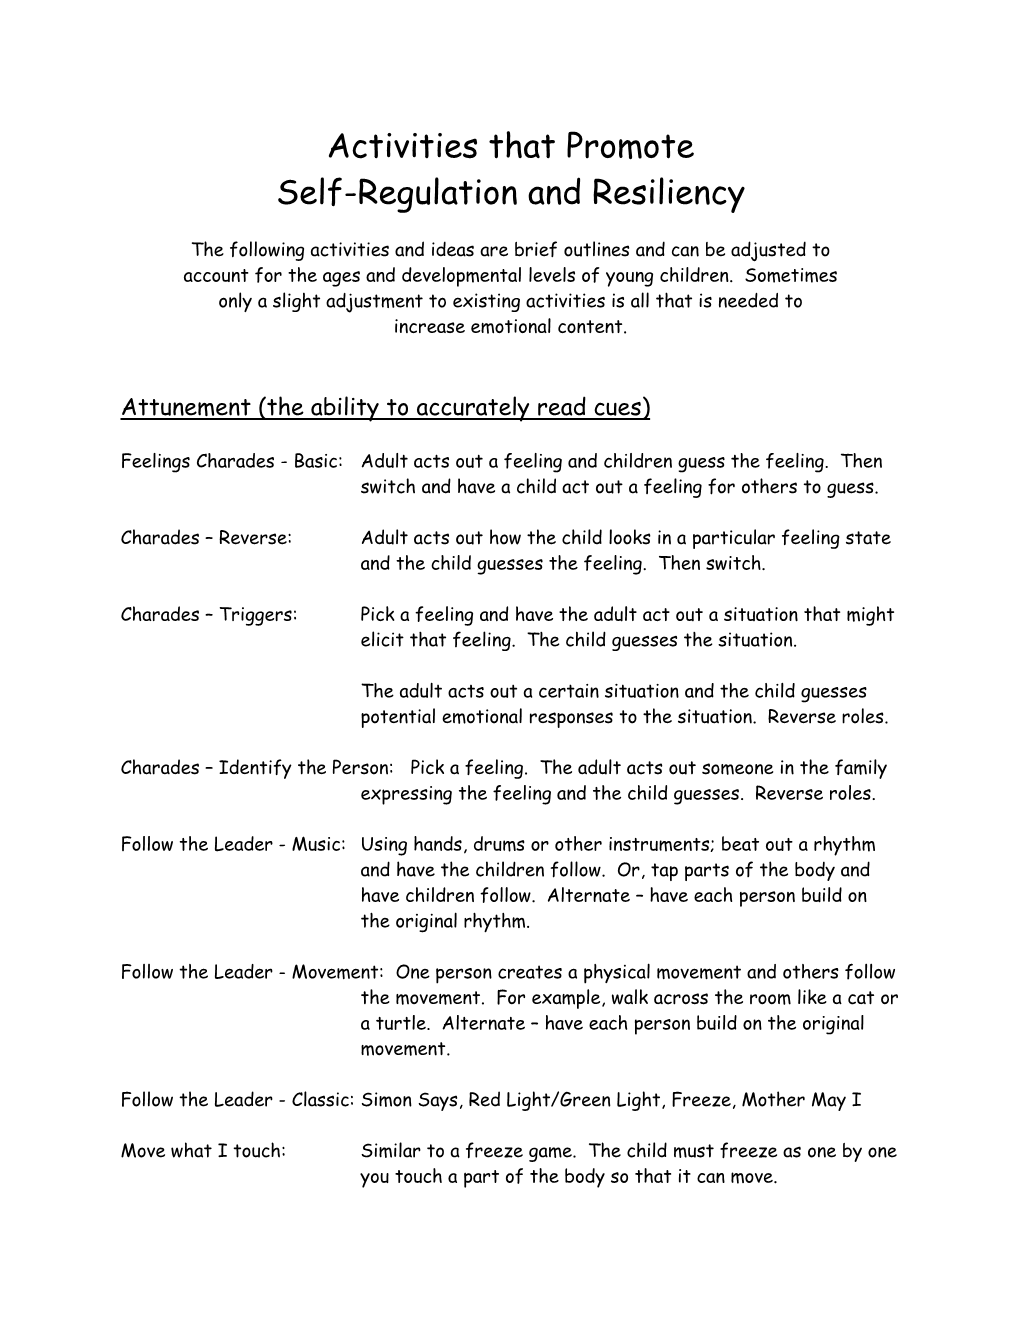 Activities That Promote Self-Regulation and Resiliency